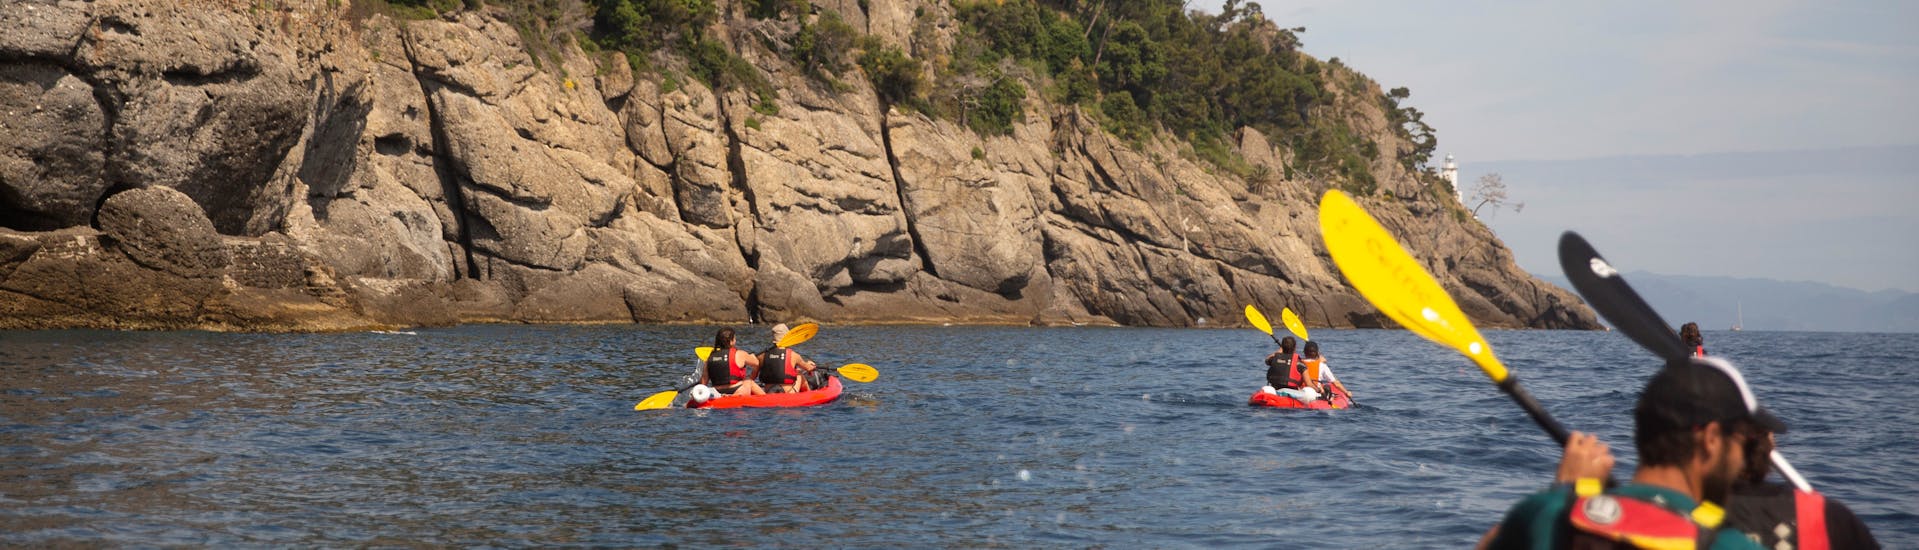 Kayaks in front of cliffs during our Kayak Tour along the coast of Portofino with Outdoor Portofino.